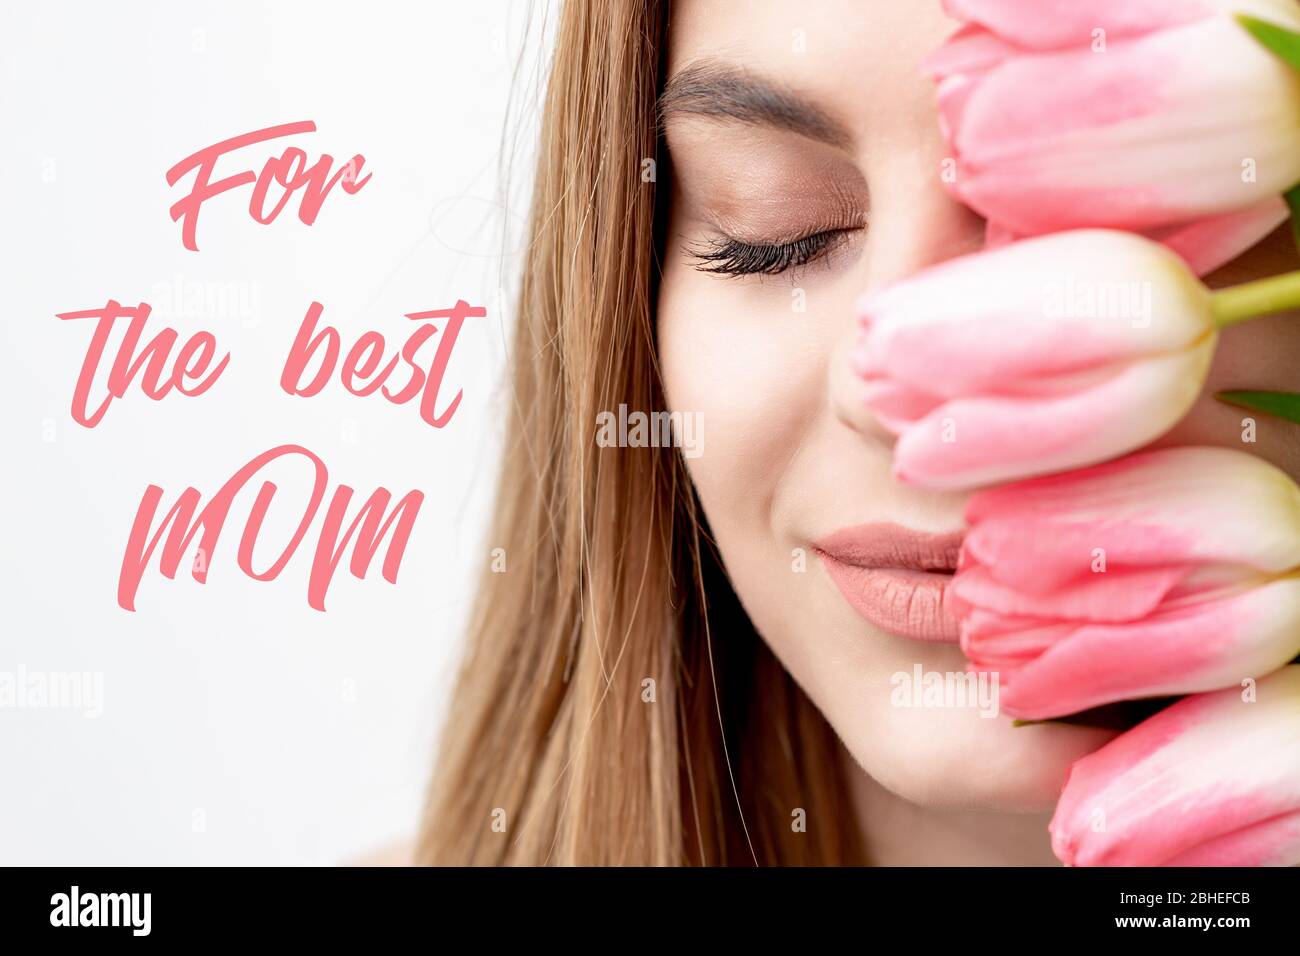 Smiling young woman with pink tulips, sign text For The Best Mom on white background. Mother's day celebration card. Stock Photo